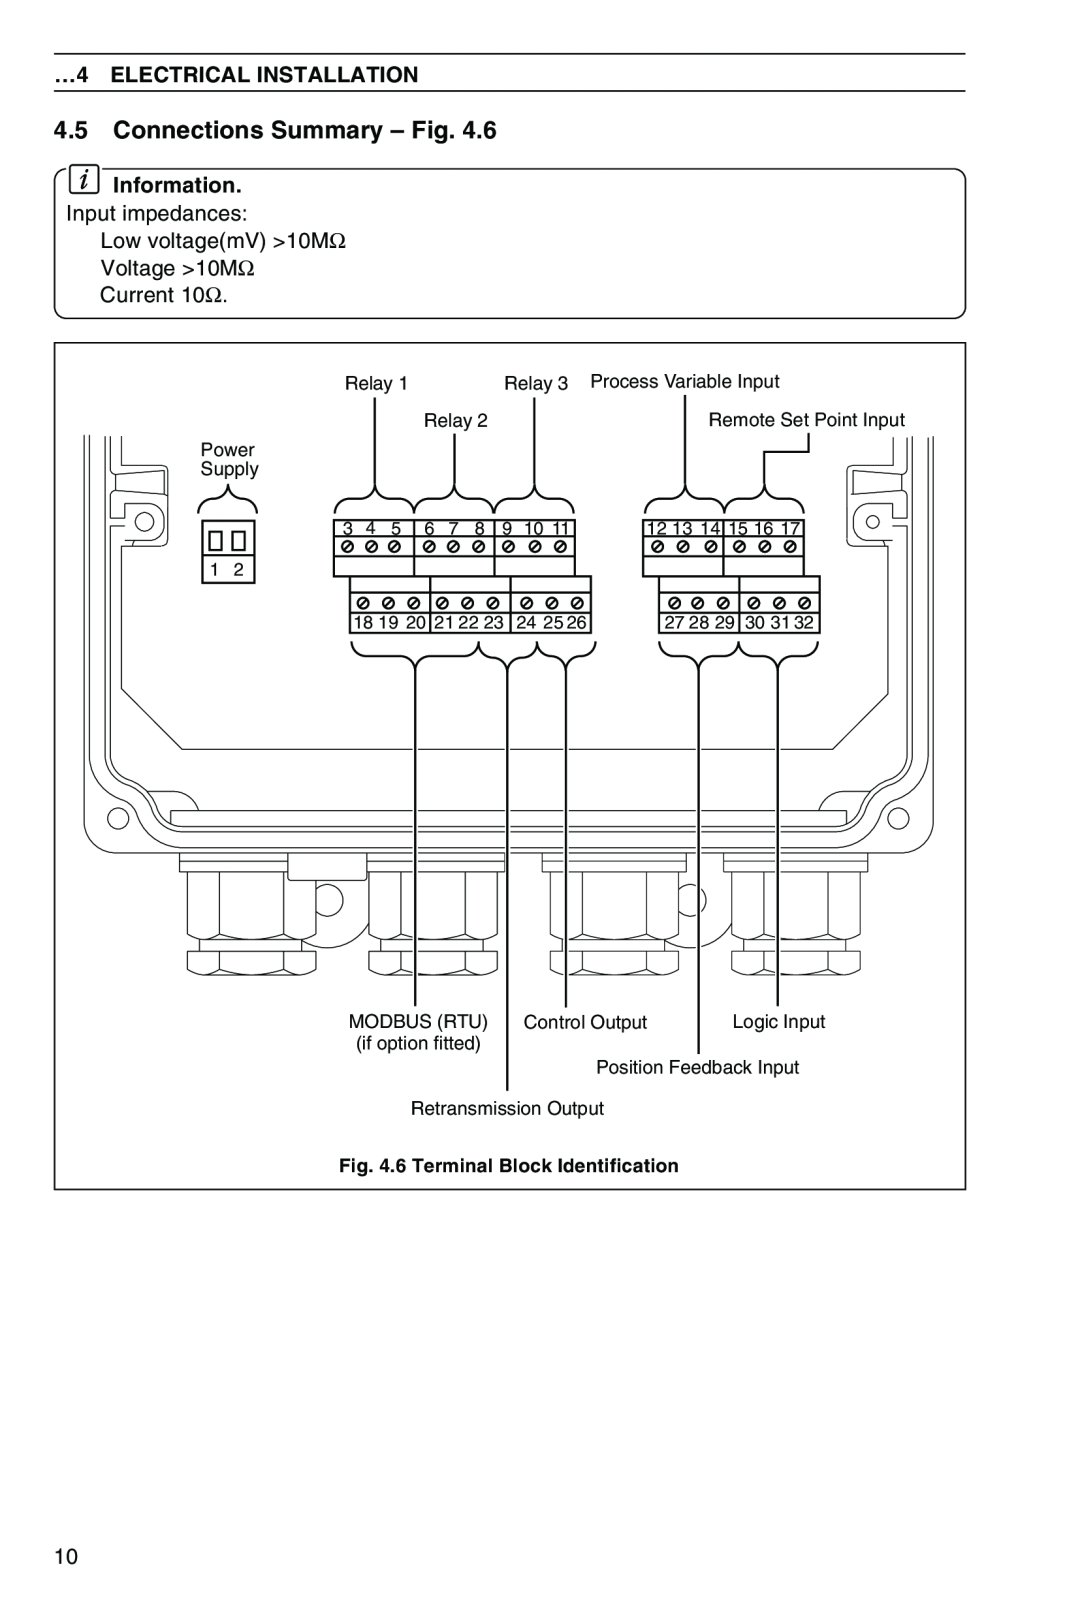 Omega CN3440 manual 4.5Connections Summary - Fig, …4 ELECTRICAL INSTALLATION, Information 